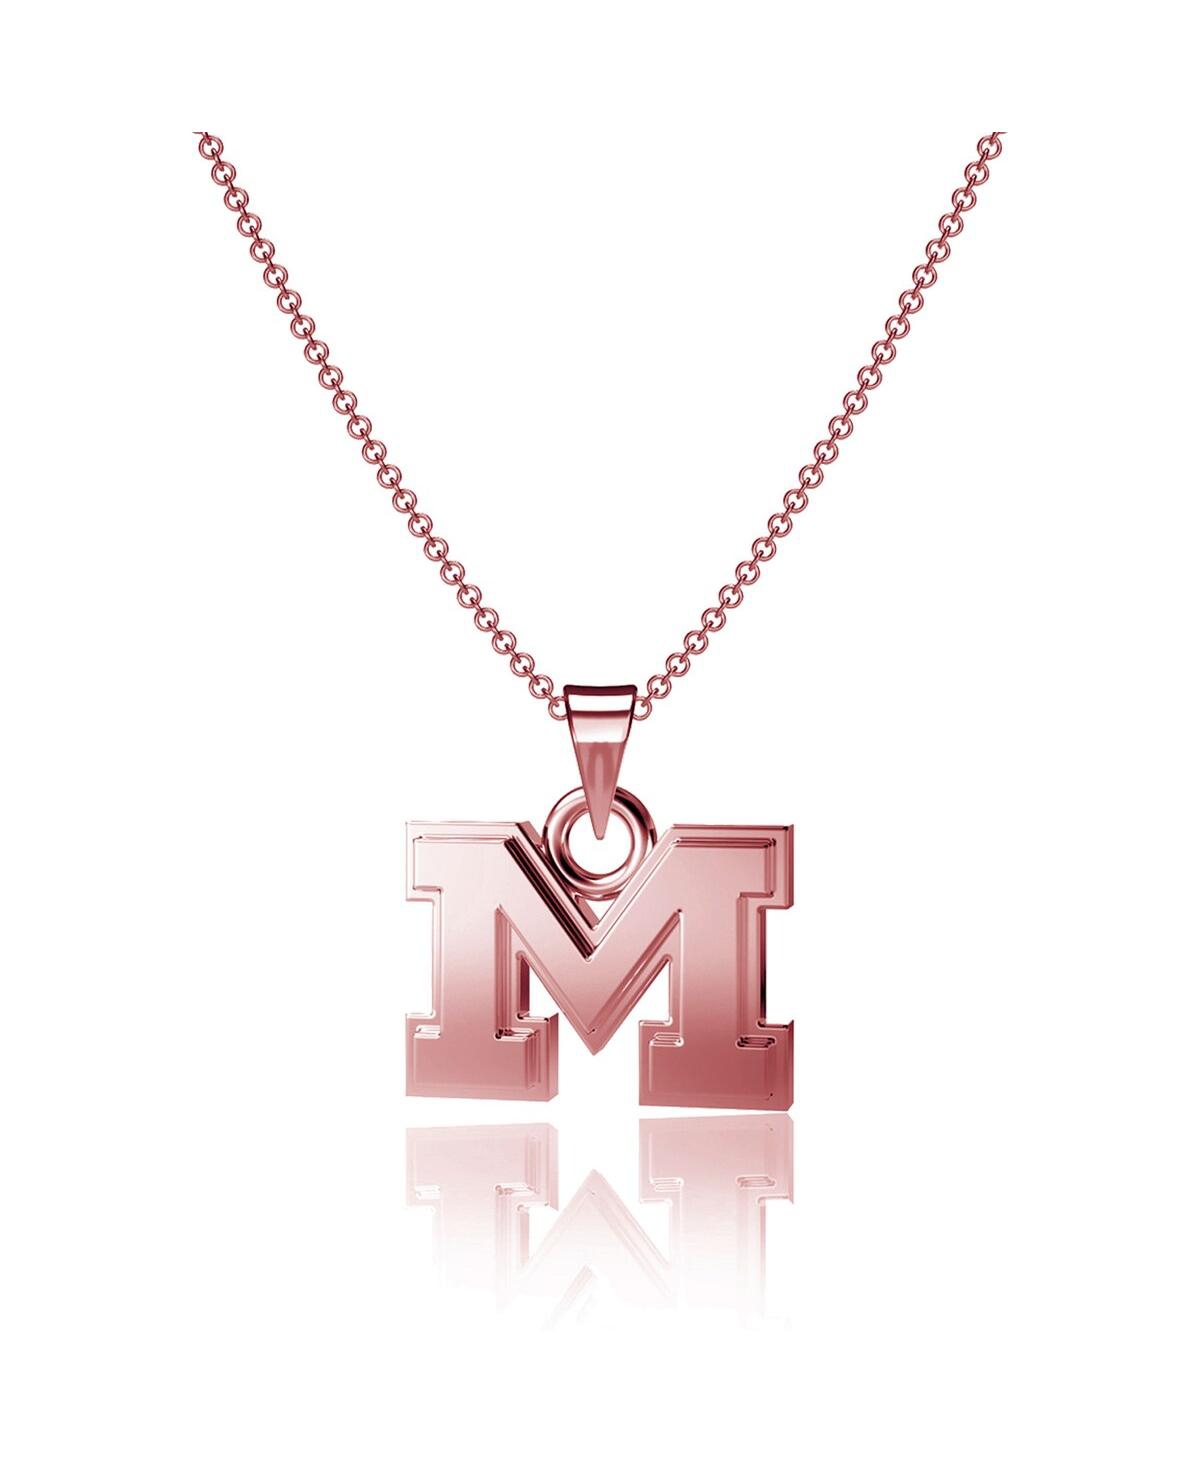 Women's Dayna Designs Michigan Wolverines Rose Gold Pendant Necklace - Rose Gold-Tone